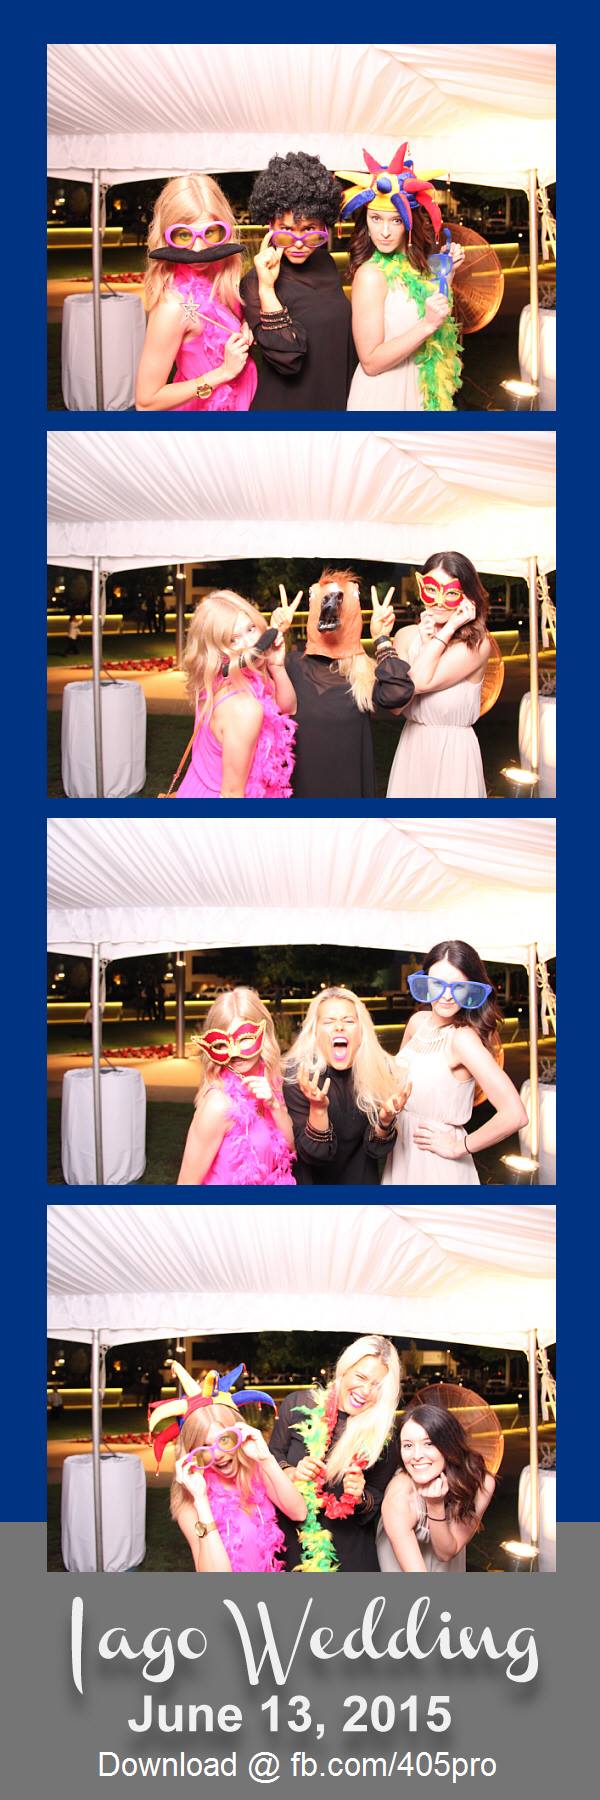 Oklahoma Norman Photo Booth Rentals Civic Center Hall Of Mirrors